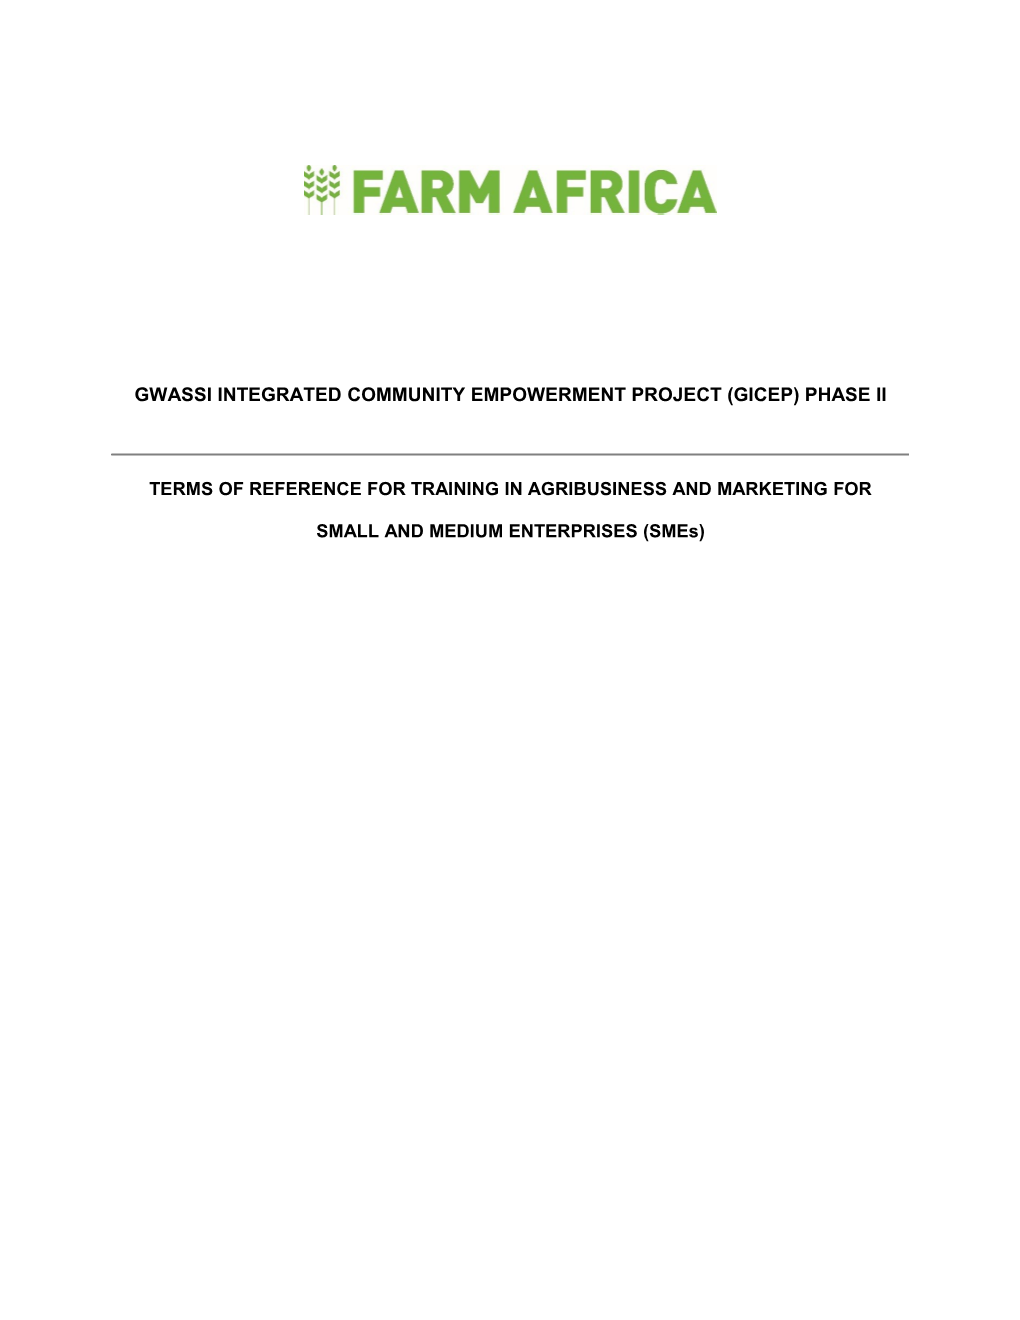 Farm Africa, an International Non-Governmental Organization Is Working to End Hunger And